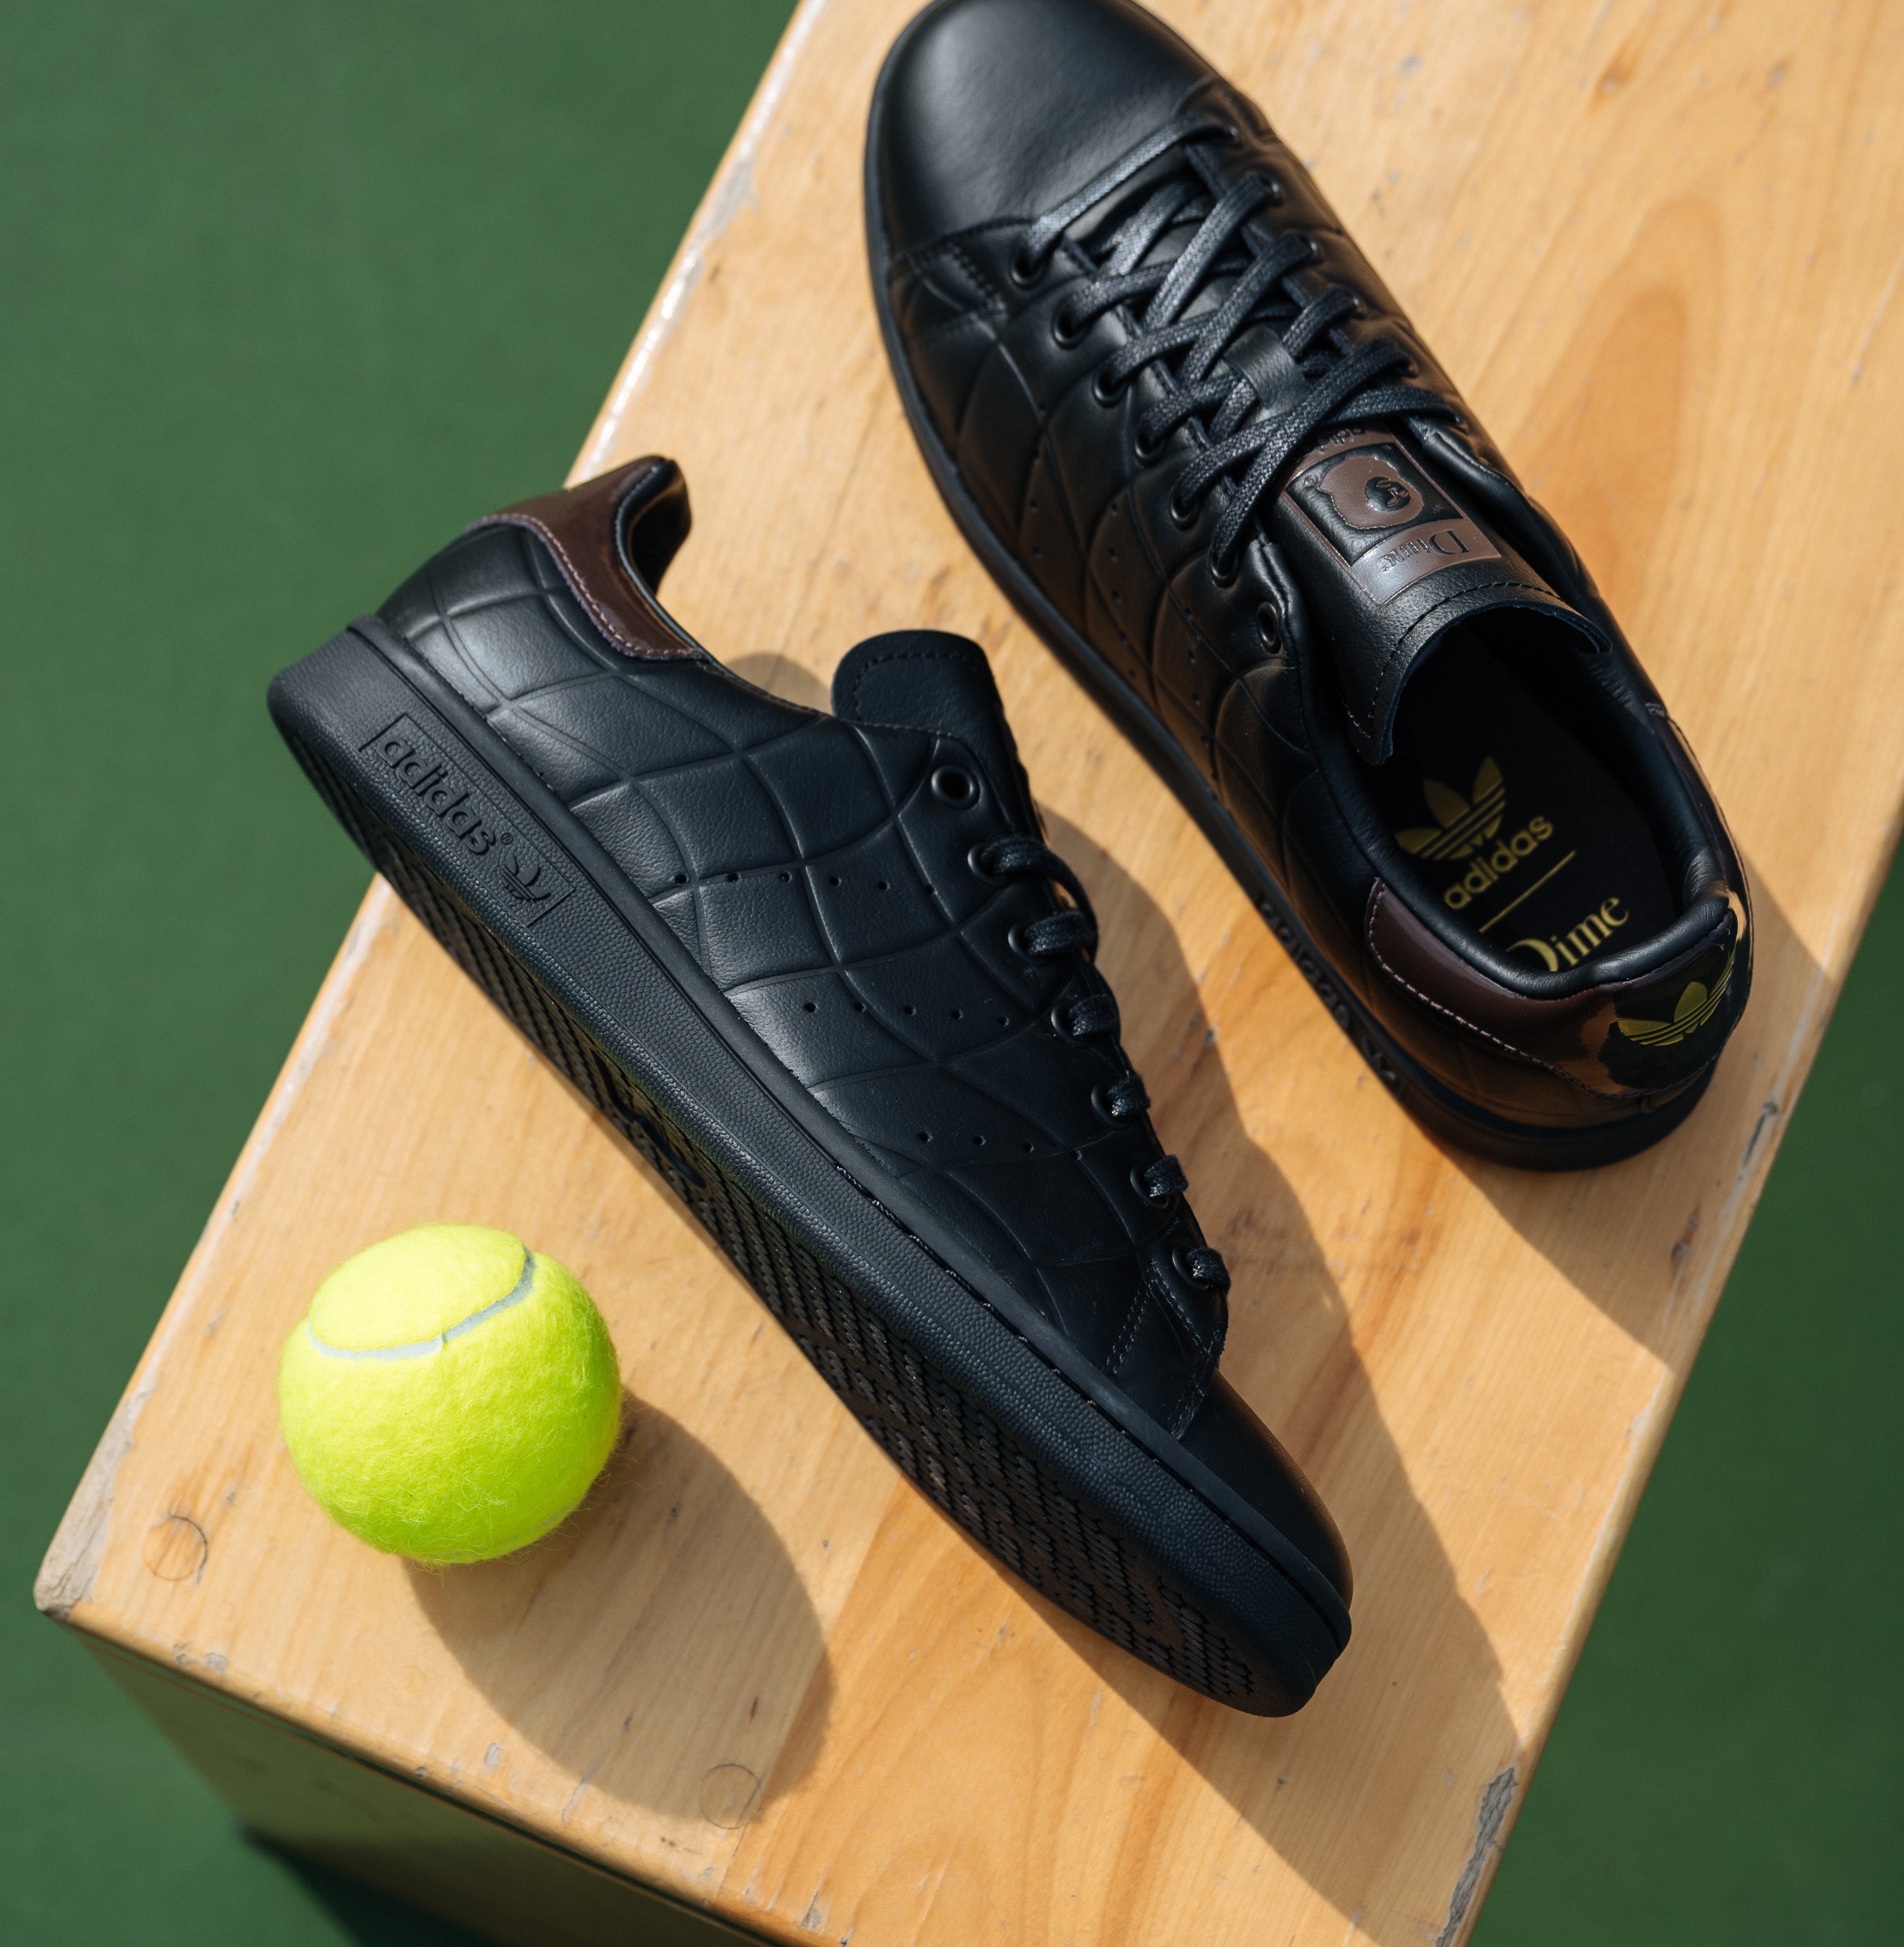 Pair of black Adidas sneakers on a wooden box with a tennis ball nearby